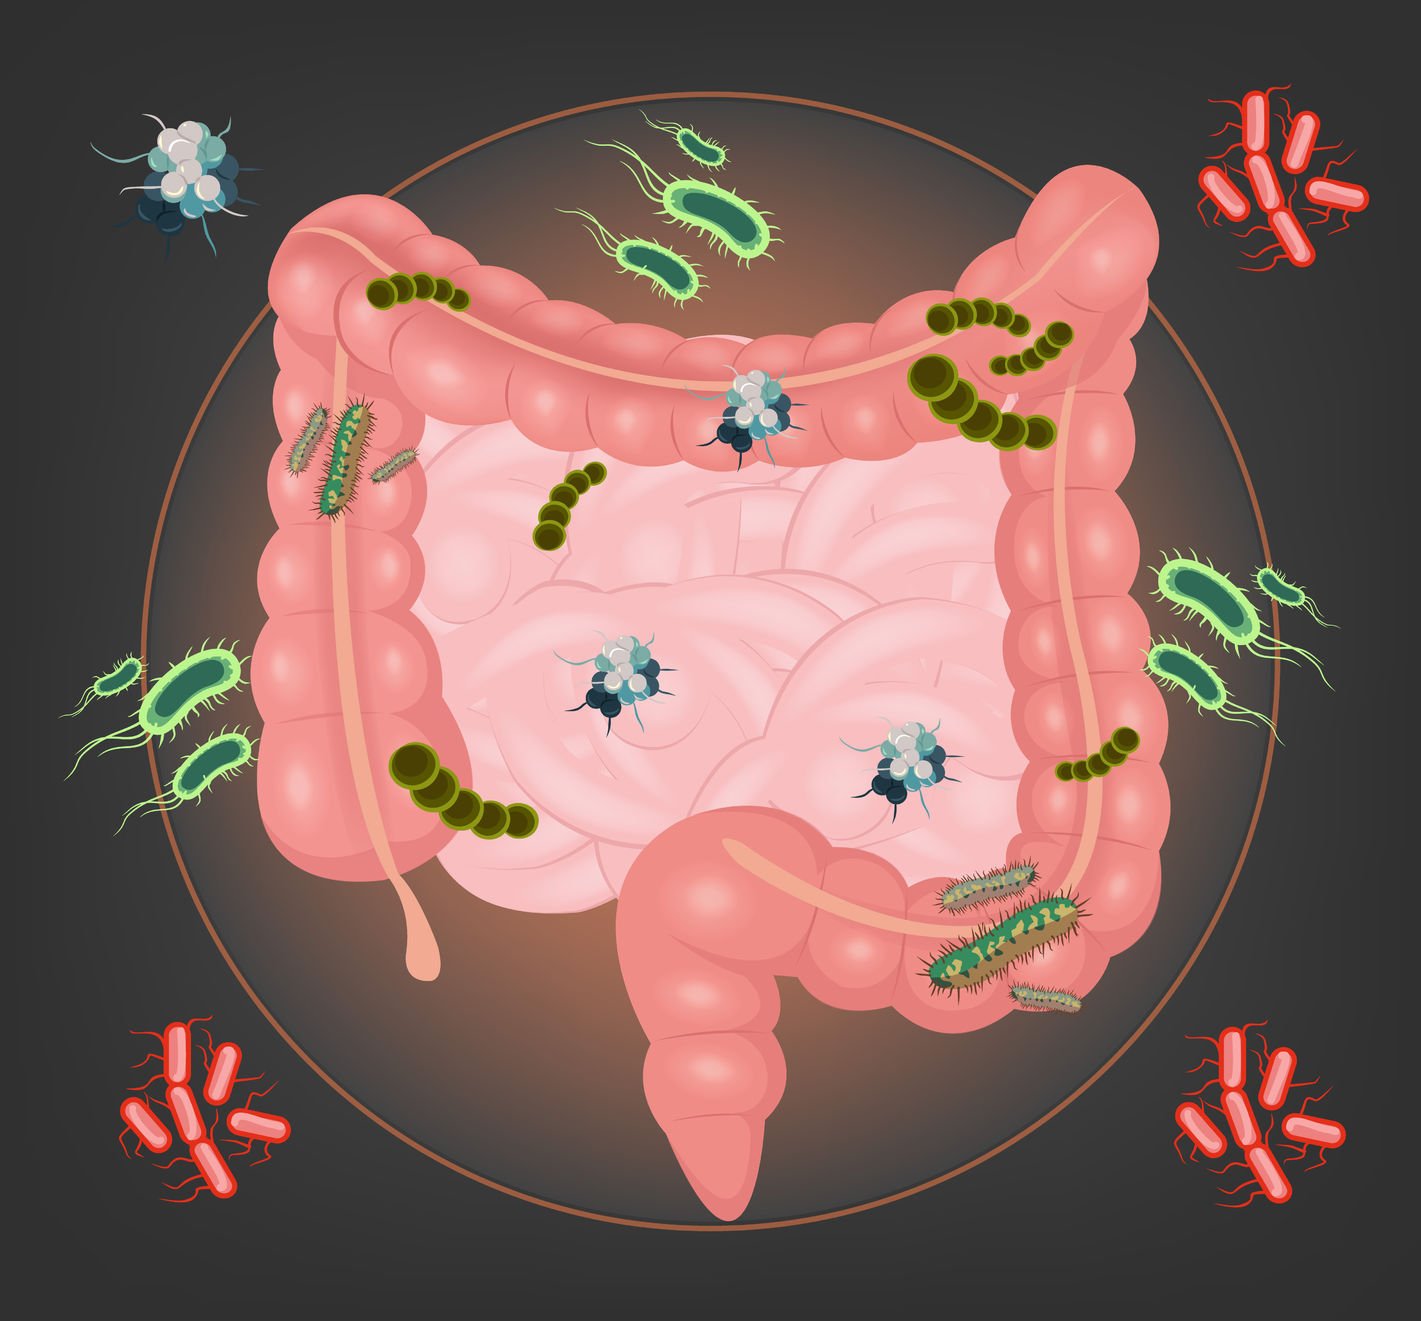 Small Intestine Bacterial Overgrowth Common But Overlooked Cause Of